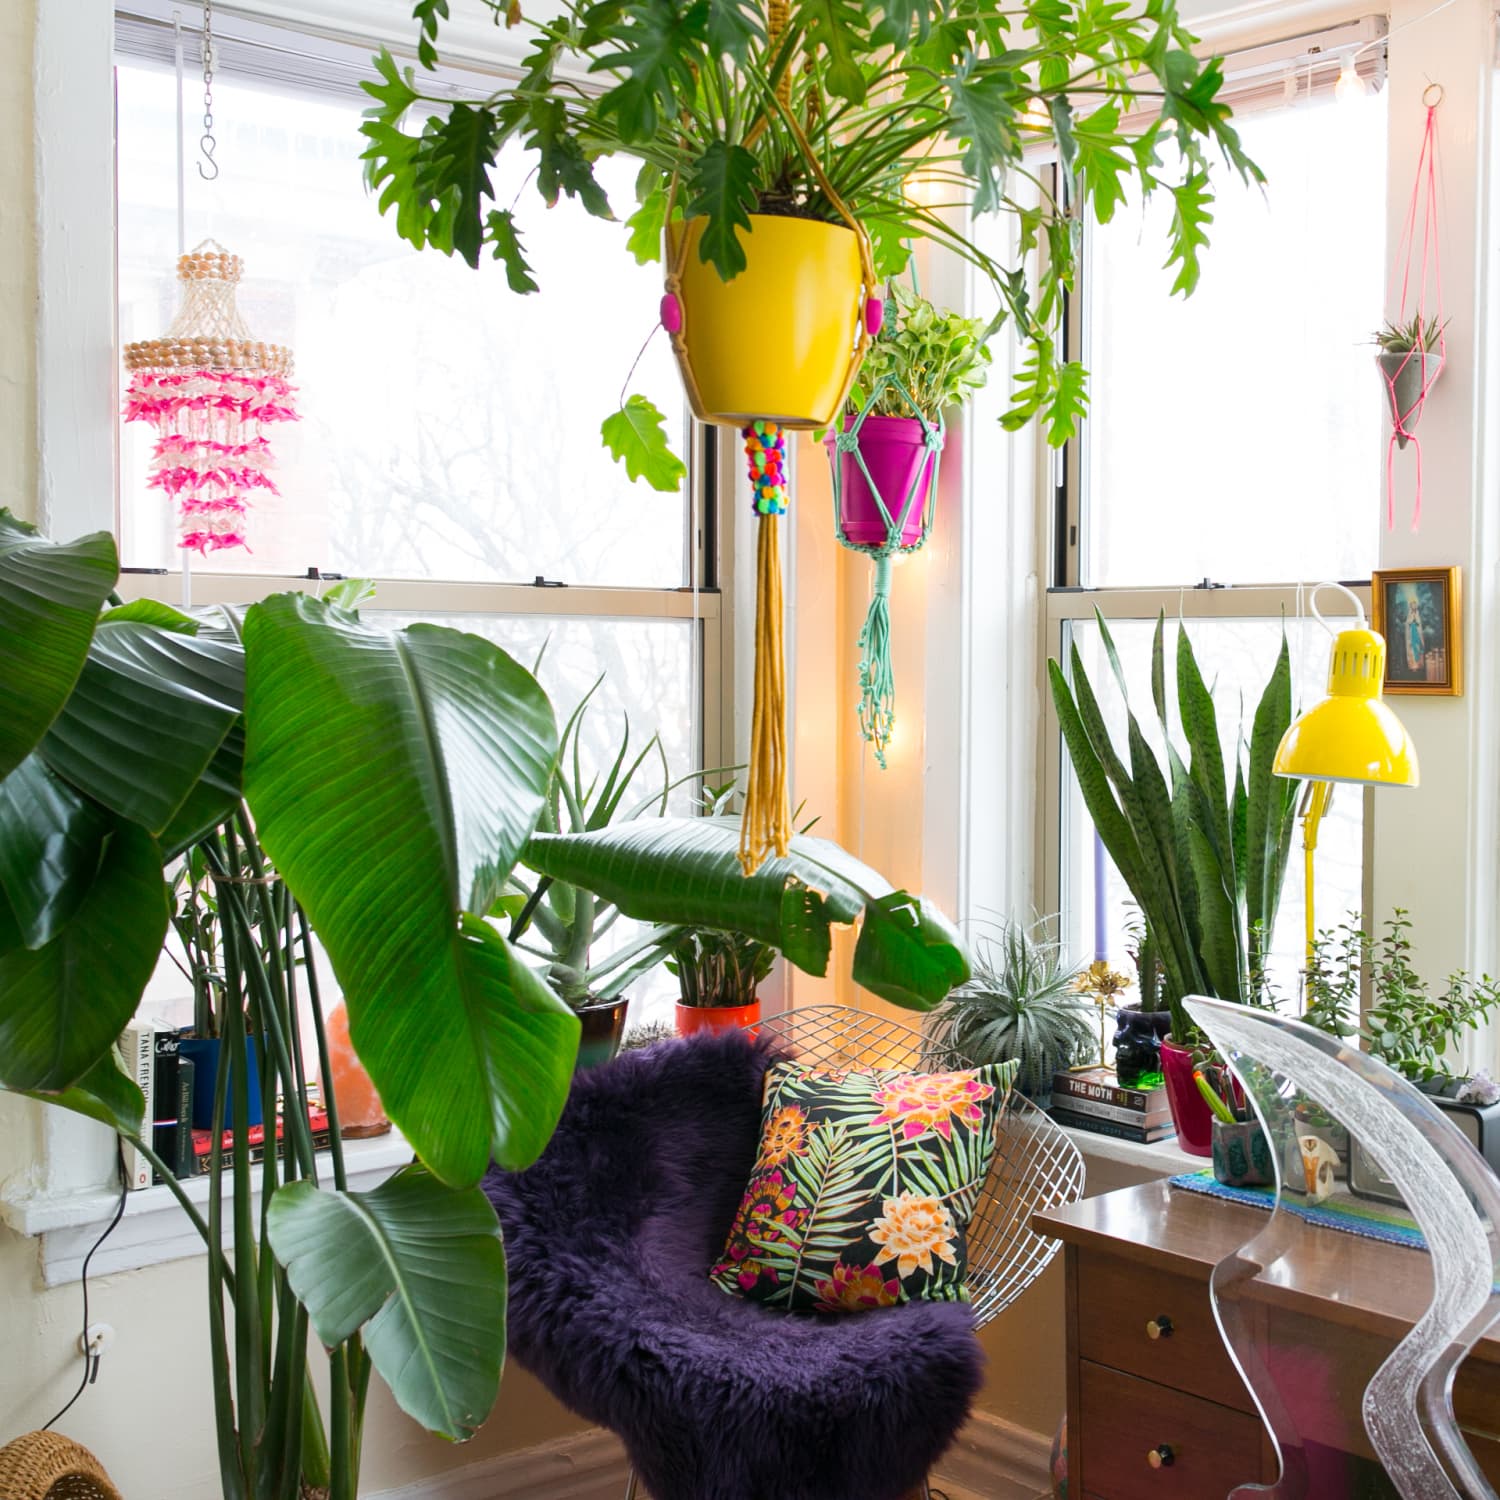 Create a Boho Vibe with Hanging Plants and Fairy Lights